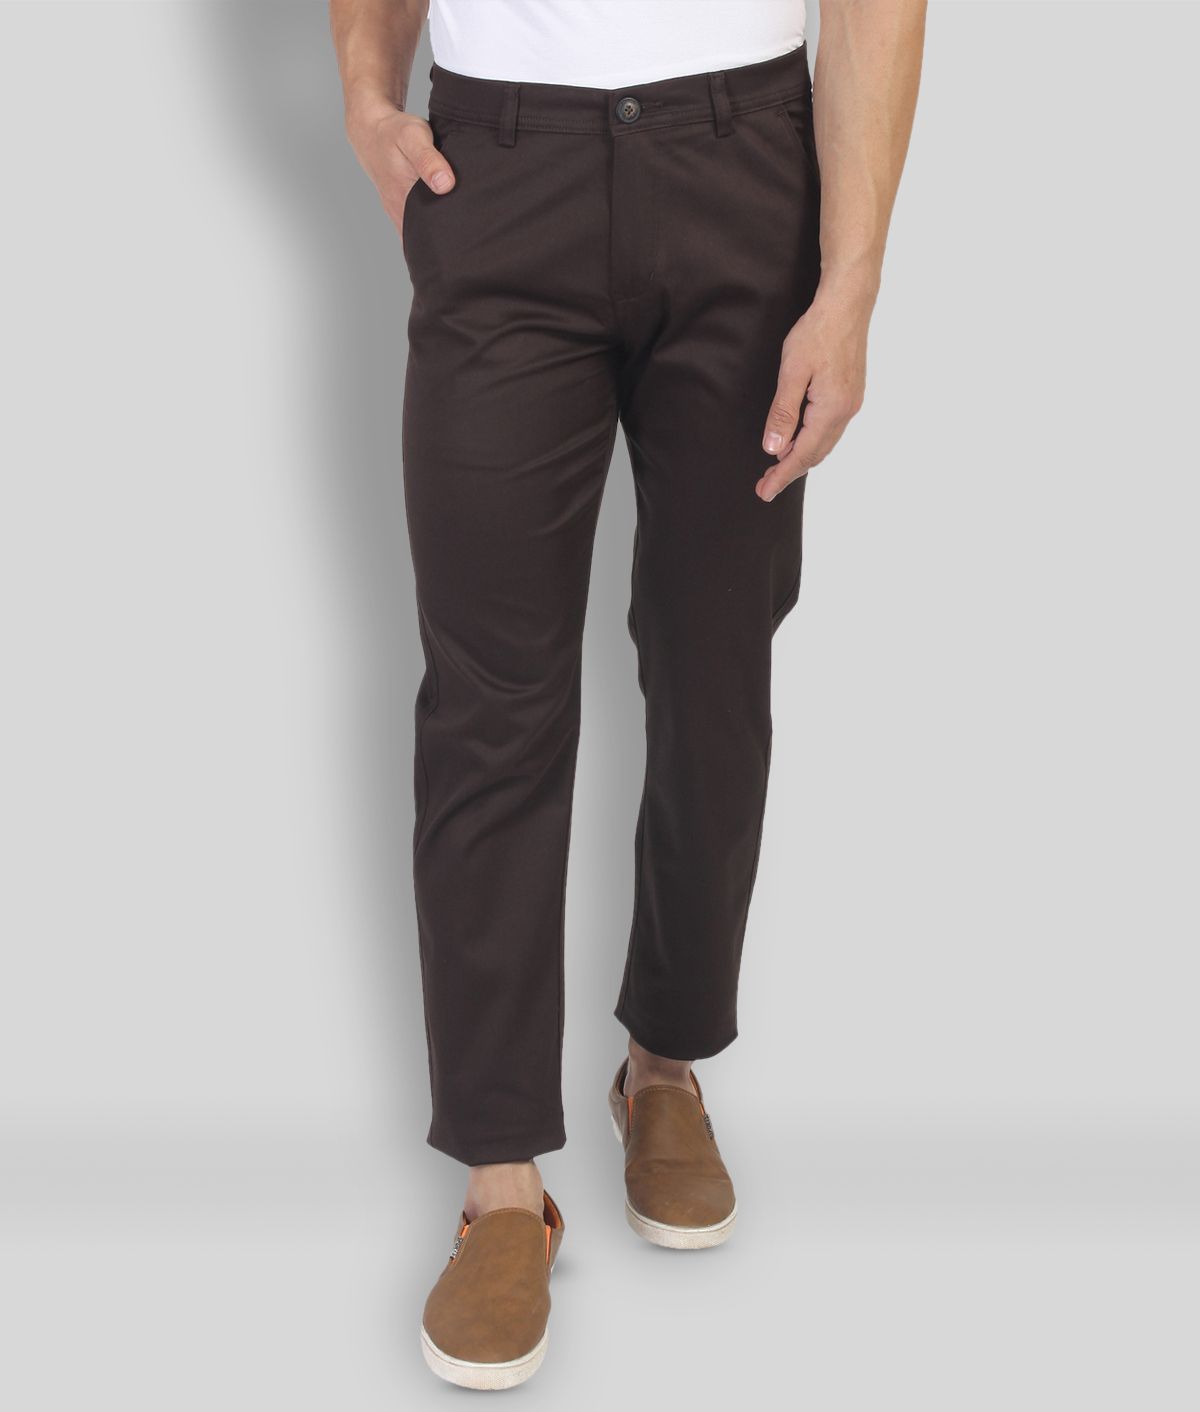 Fluidic - Brown Cotton Blend Regular Fit Men's Chinos (Pack of 1)